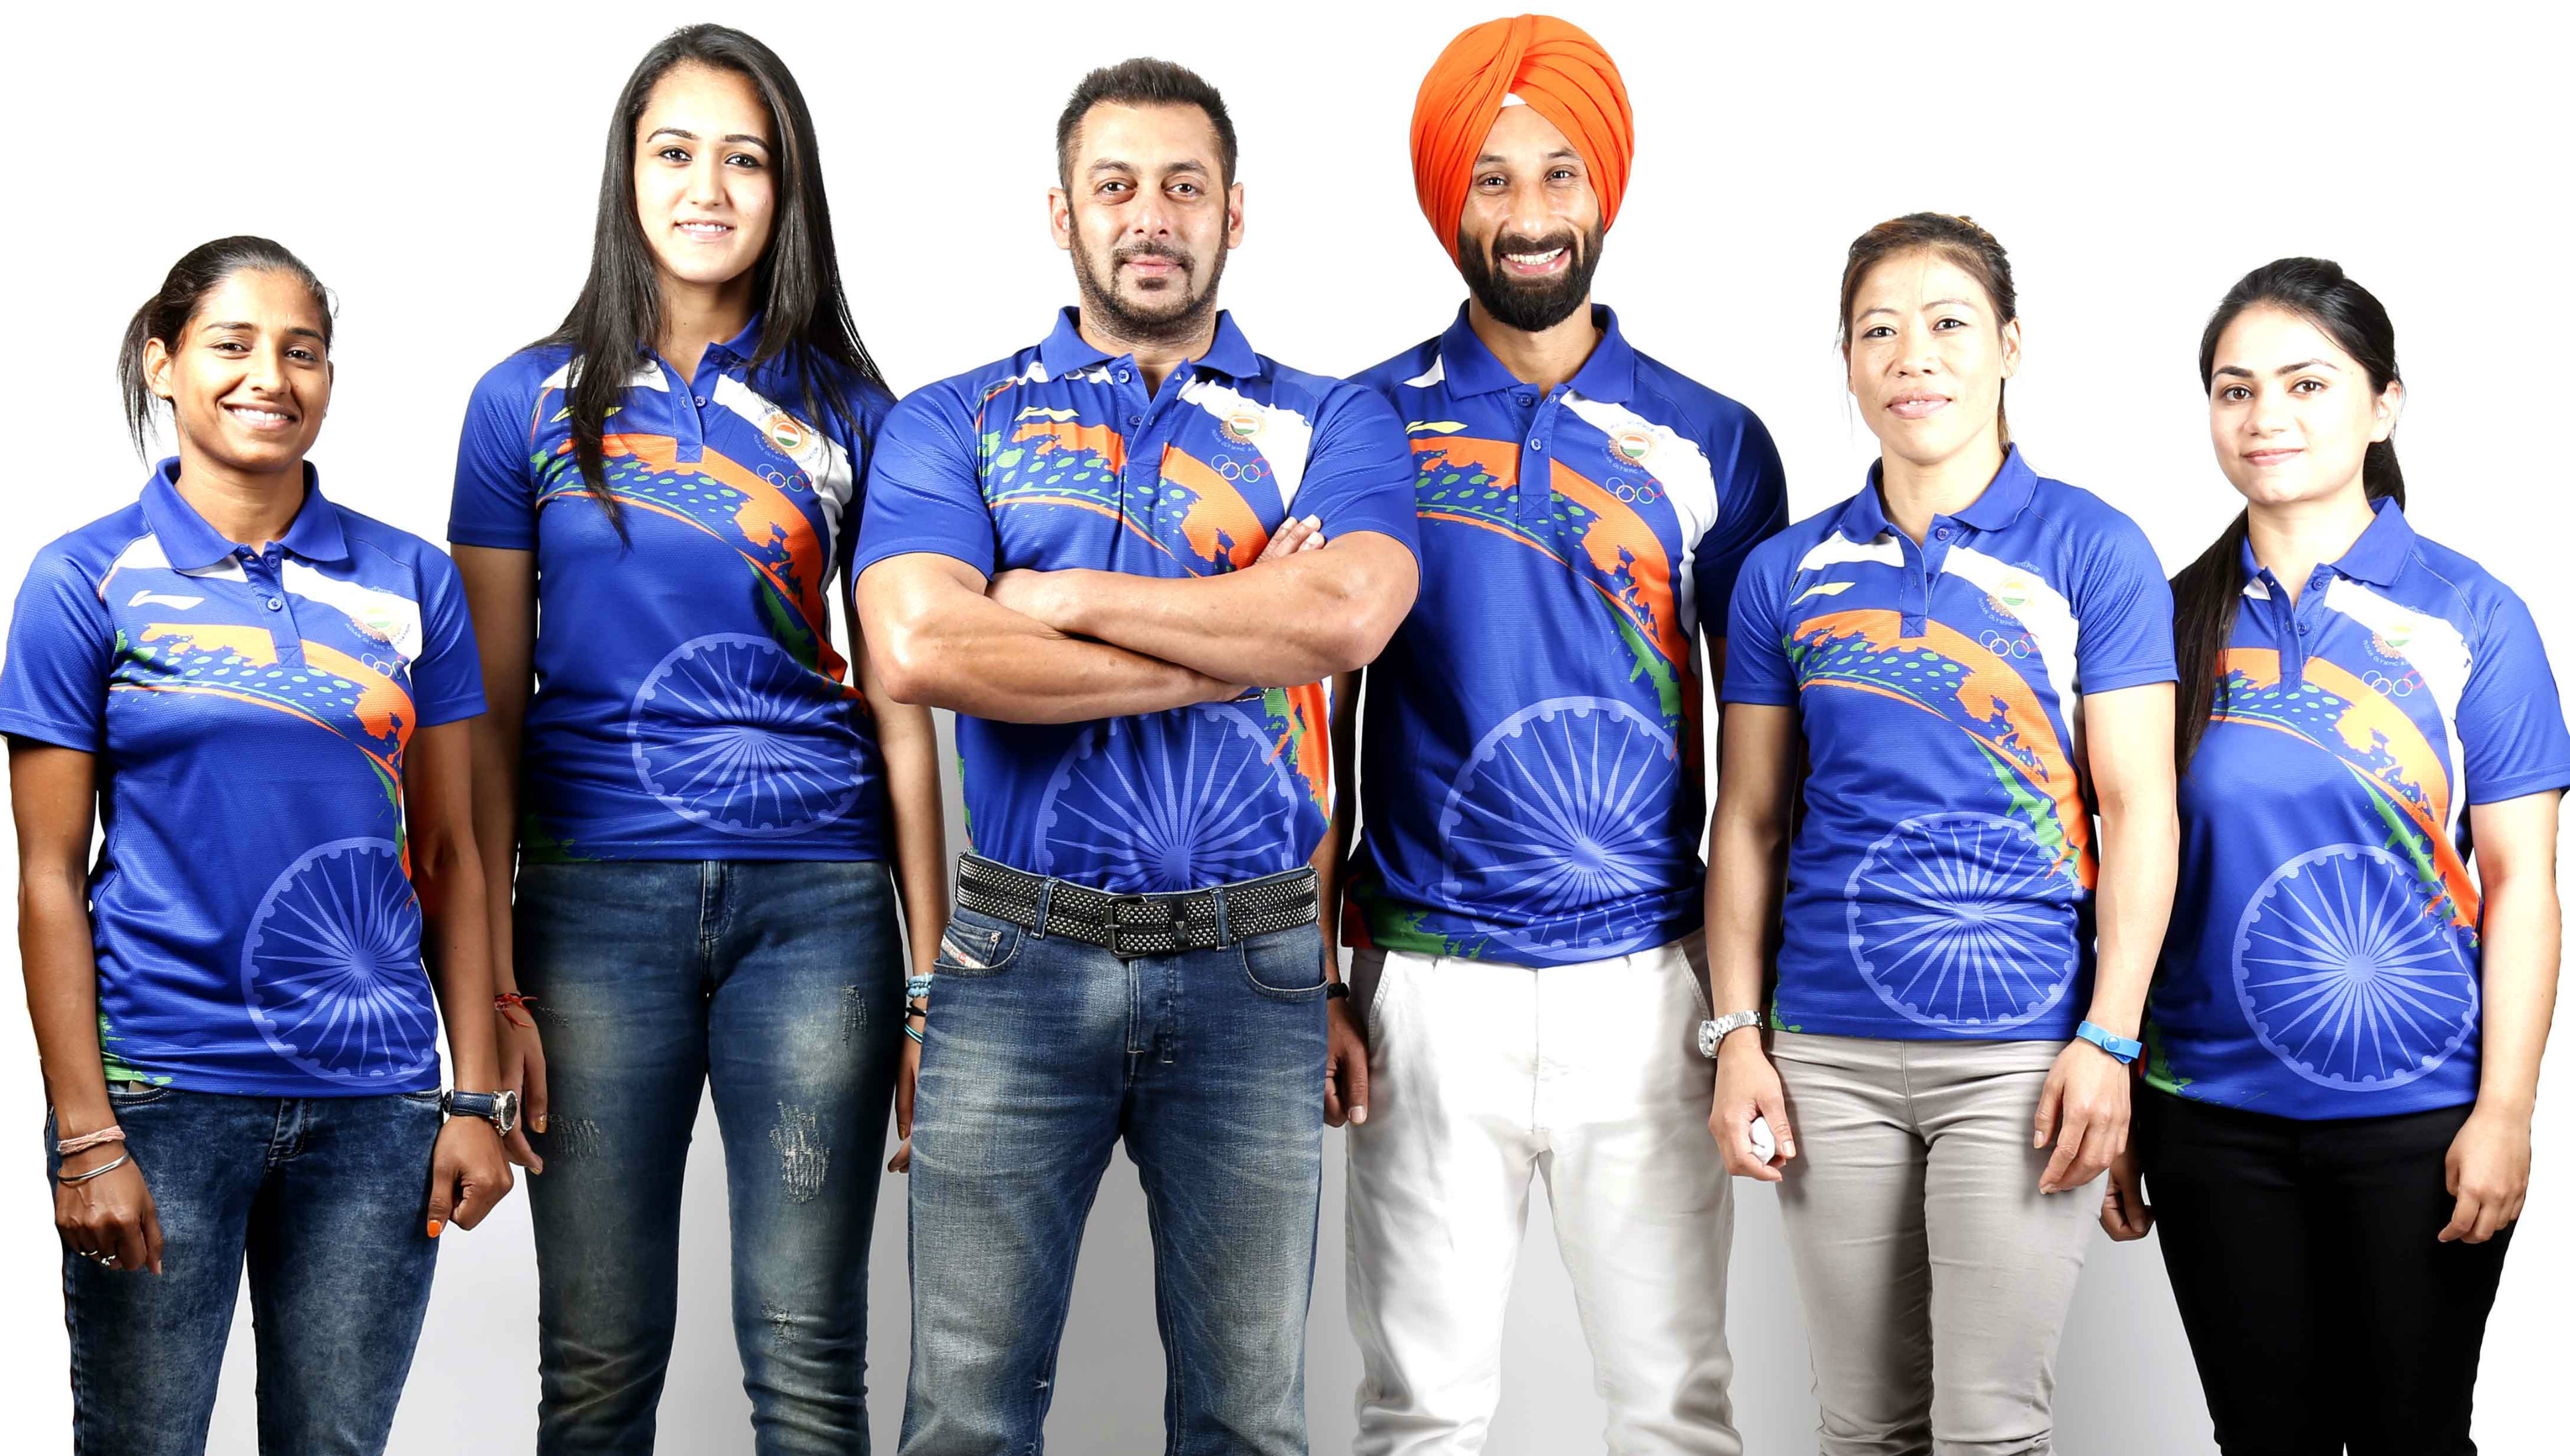 Salman Khan on sportsperson in Indian Olympic contingent